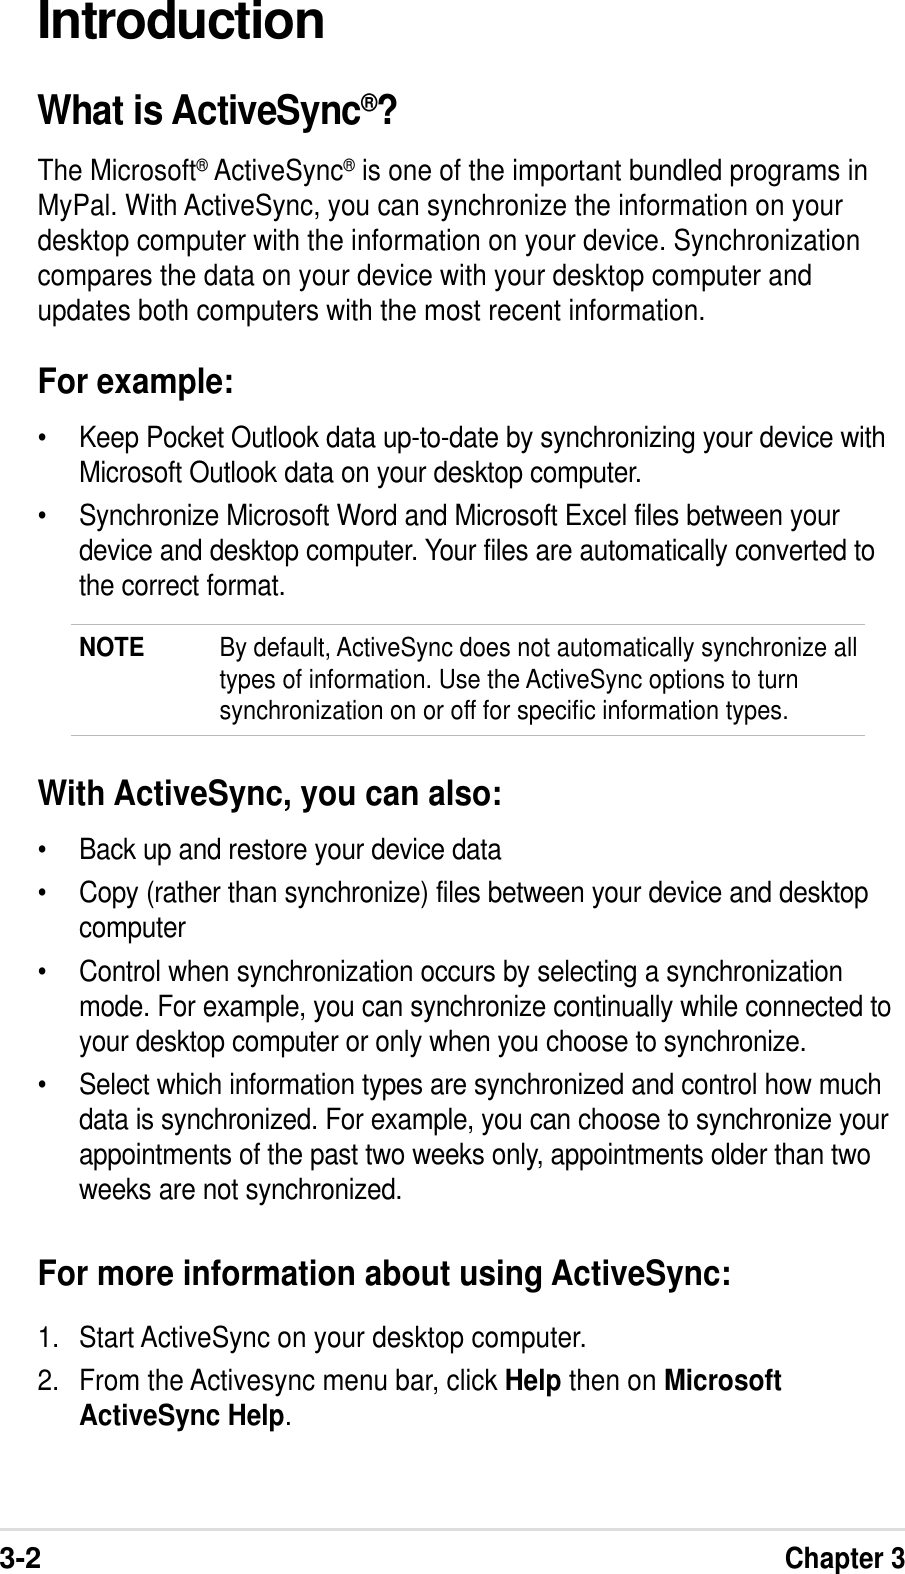 3-2Chapter 3IntroductionWhat is ActiveSync®?The Microsoft® ActiveSync® is one of the important bundled programs inMyPal. With ActiveSync, you can synchronize the information on yourdesktop computer with the information on your device. Synchronizationcompares the data on your device with your desktop computer andupdates both computers with the most recent information.For example:• Keep Pocket Outlook data up-to-date by synchronizing your device withMicrosoft Outlook data on your desktop computer.• Synchronize Microsoft Word and Microsoft Excel files between yourdevice and desktop computer. Your files are automatically converted tothe correct format.NOTE By default, ActiveSync does not automatically synchronize alltypes of information. Use the ActiveSync options to turnsynchronization on or off for specific information types.With ActiveSync, you can also:• Back up and restore your device data• Copy (rather than synchronize) files between your device and desktopcomputer• Control when synchronization occurs by selecting a synchronizationmode. For example, you can synchronize continually while connected toyour desktop computer or only when you choose to synchronize.• Select which information types are synchronized and control how muchdata is synchronized. For example, you can choose to synchronize yourappointments of the past two weeks only, appointments older than twoweeks are not synchronized.For more information about using ActiveSync:1. Start ActiveSync on your desktop computer.2. From the Activesync menu bar, click Help then on MicrosoftActiveSync Help.